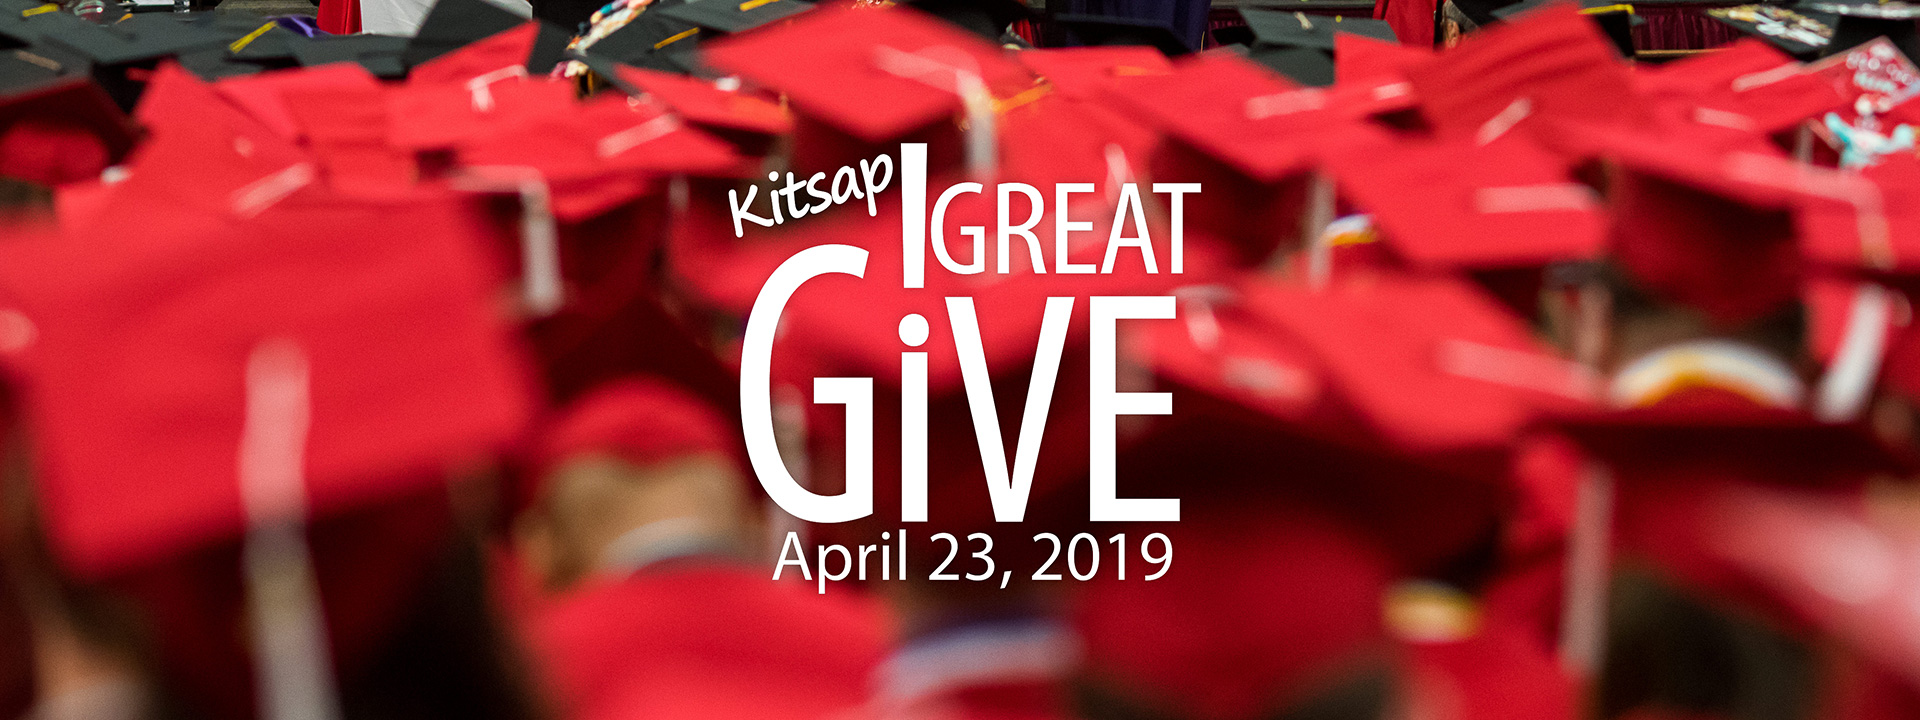 Support OC during the 2019 Kitsap Great Give